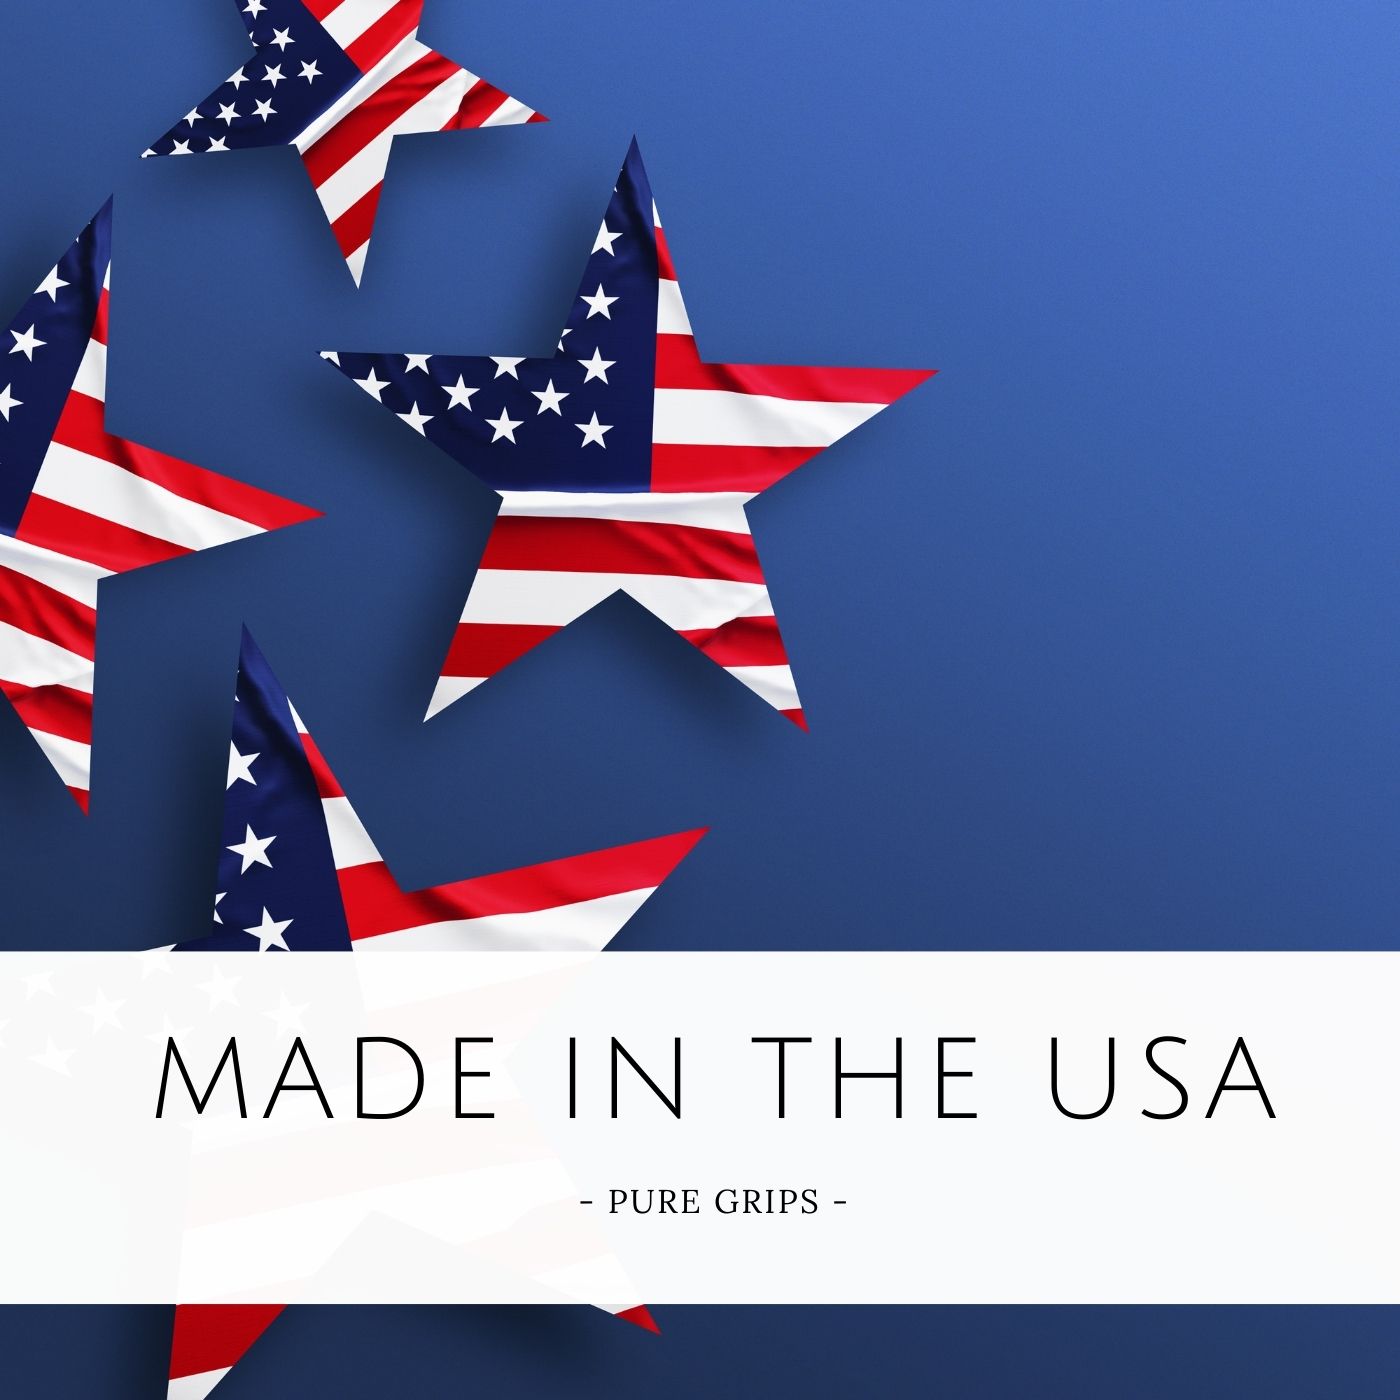 PURE Grips are Golf Grips Proudly Made in the USA